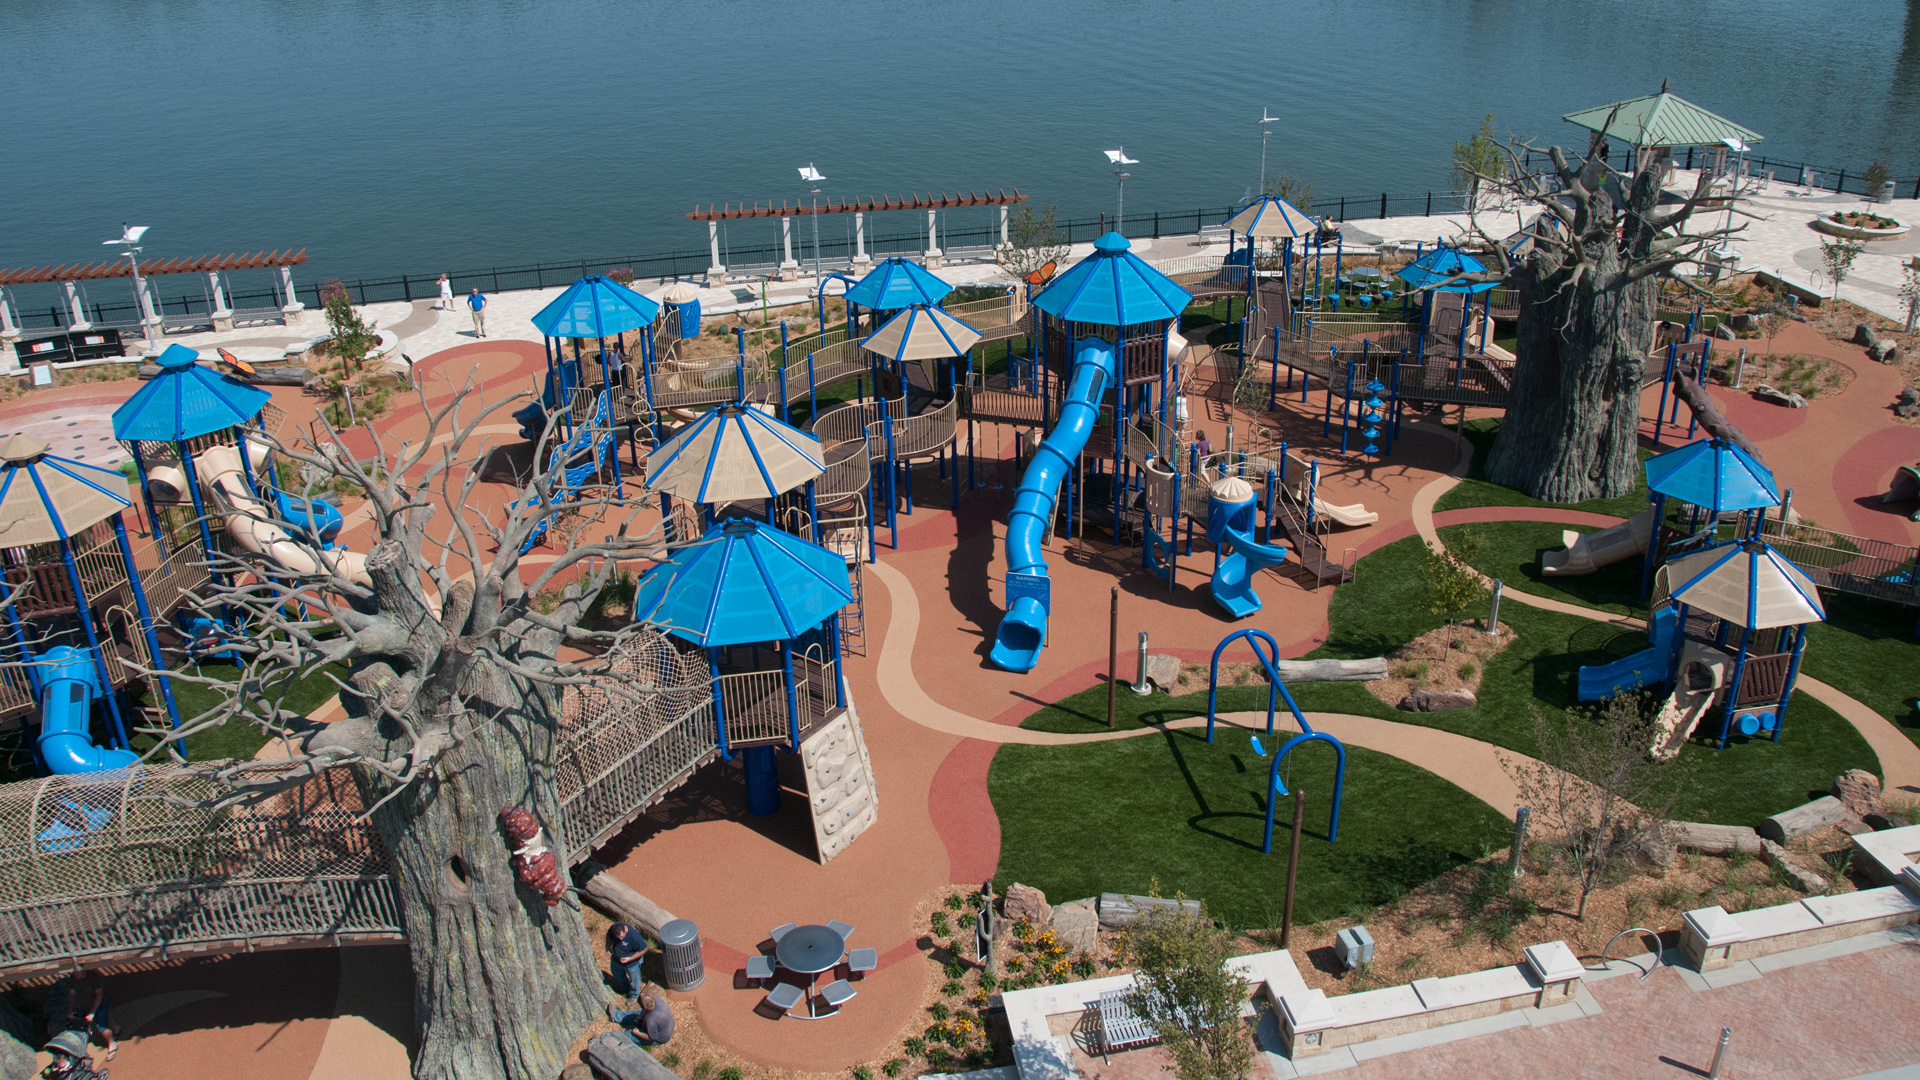 13 Playgrounds You Wish You Had